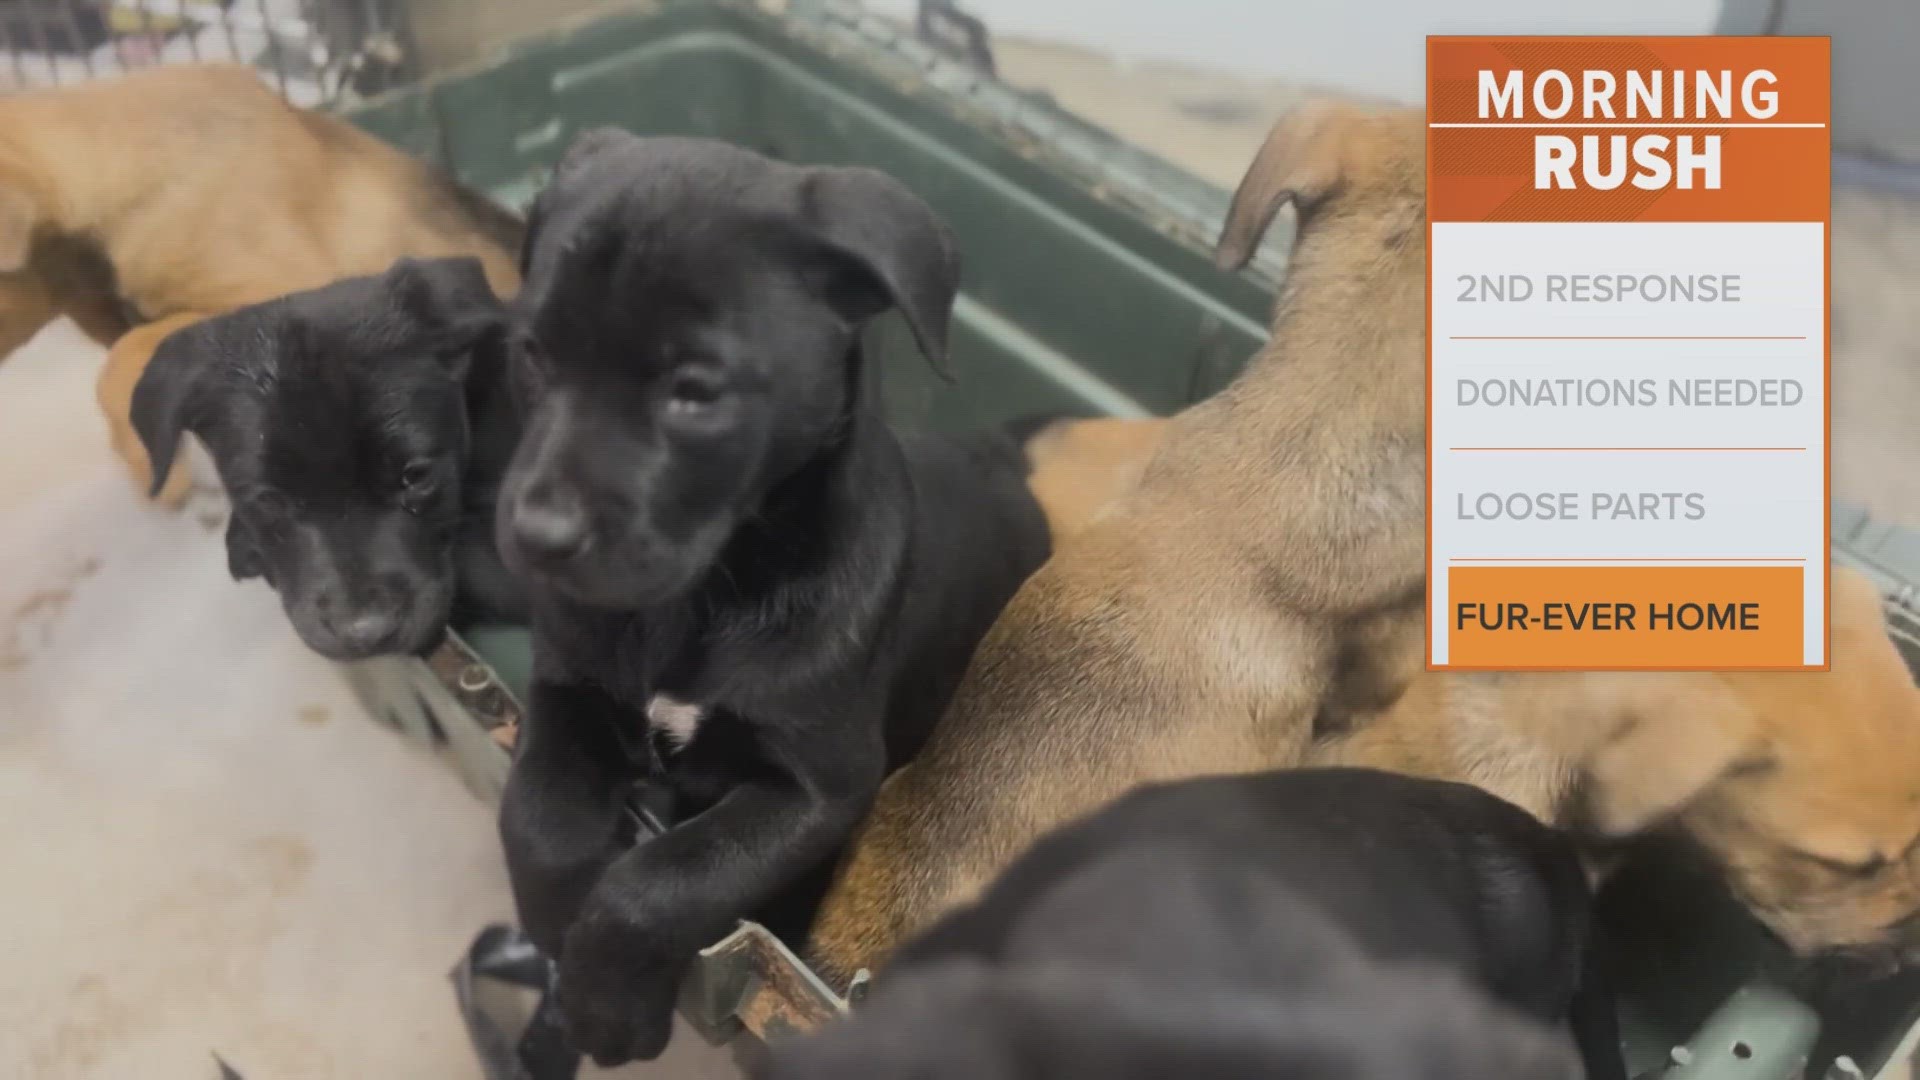 In an update Friday, the Humane Society said five of the puppies (all males) were adopted and the three remaining female puppies are being cared for.